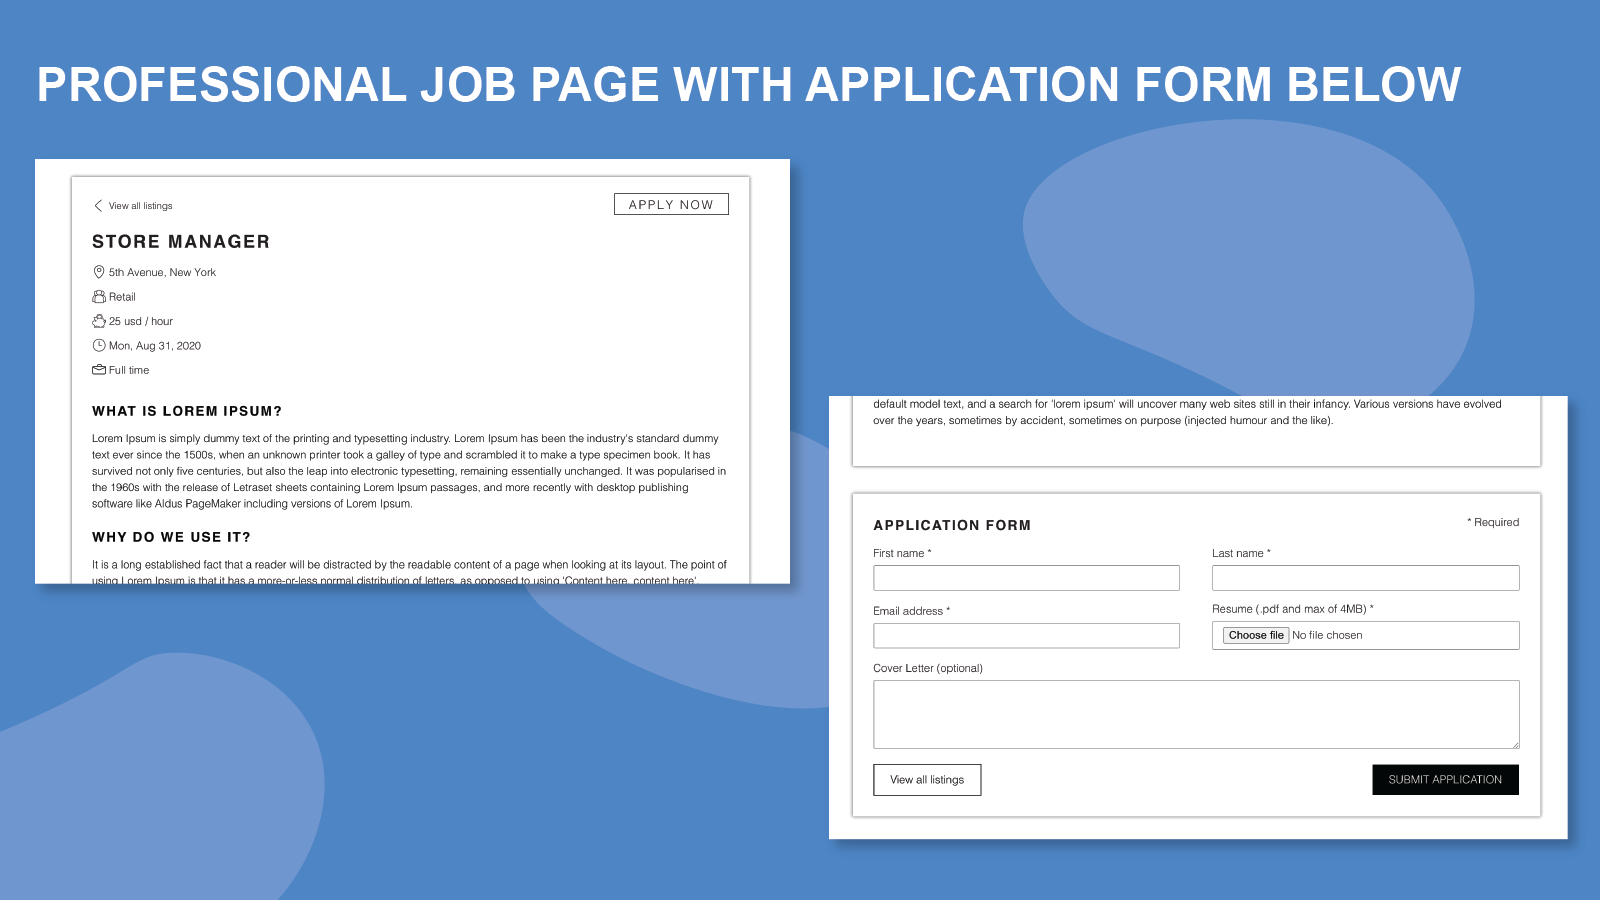 Professional job page with application form below